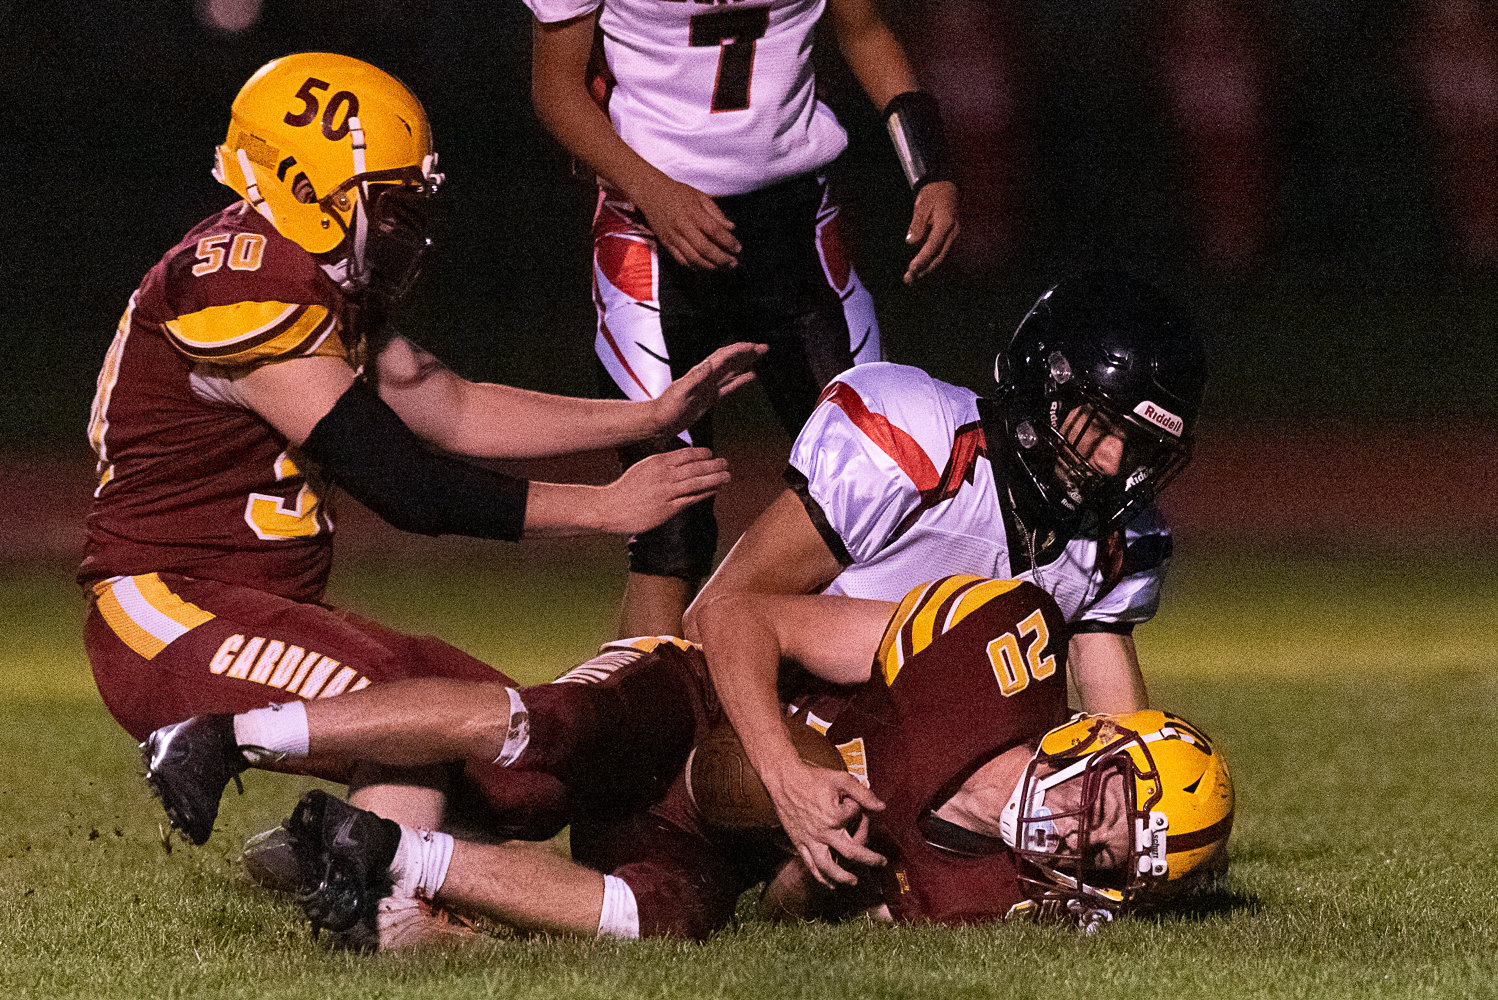 Kaiden Perkins jumps on a fumble during the first quarter of Winlock's 36-28 win over Oakville on Oct. 7.